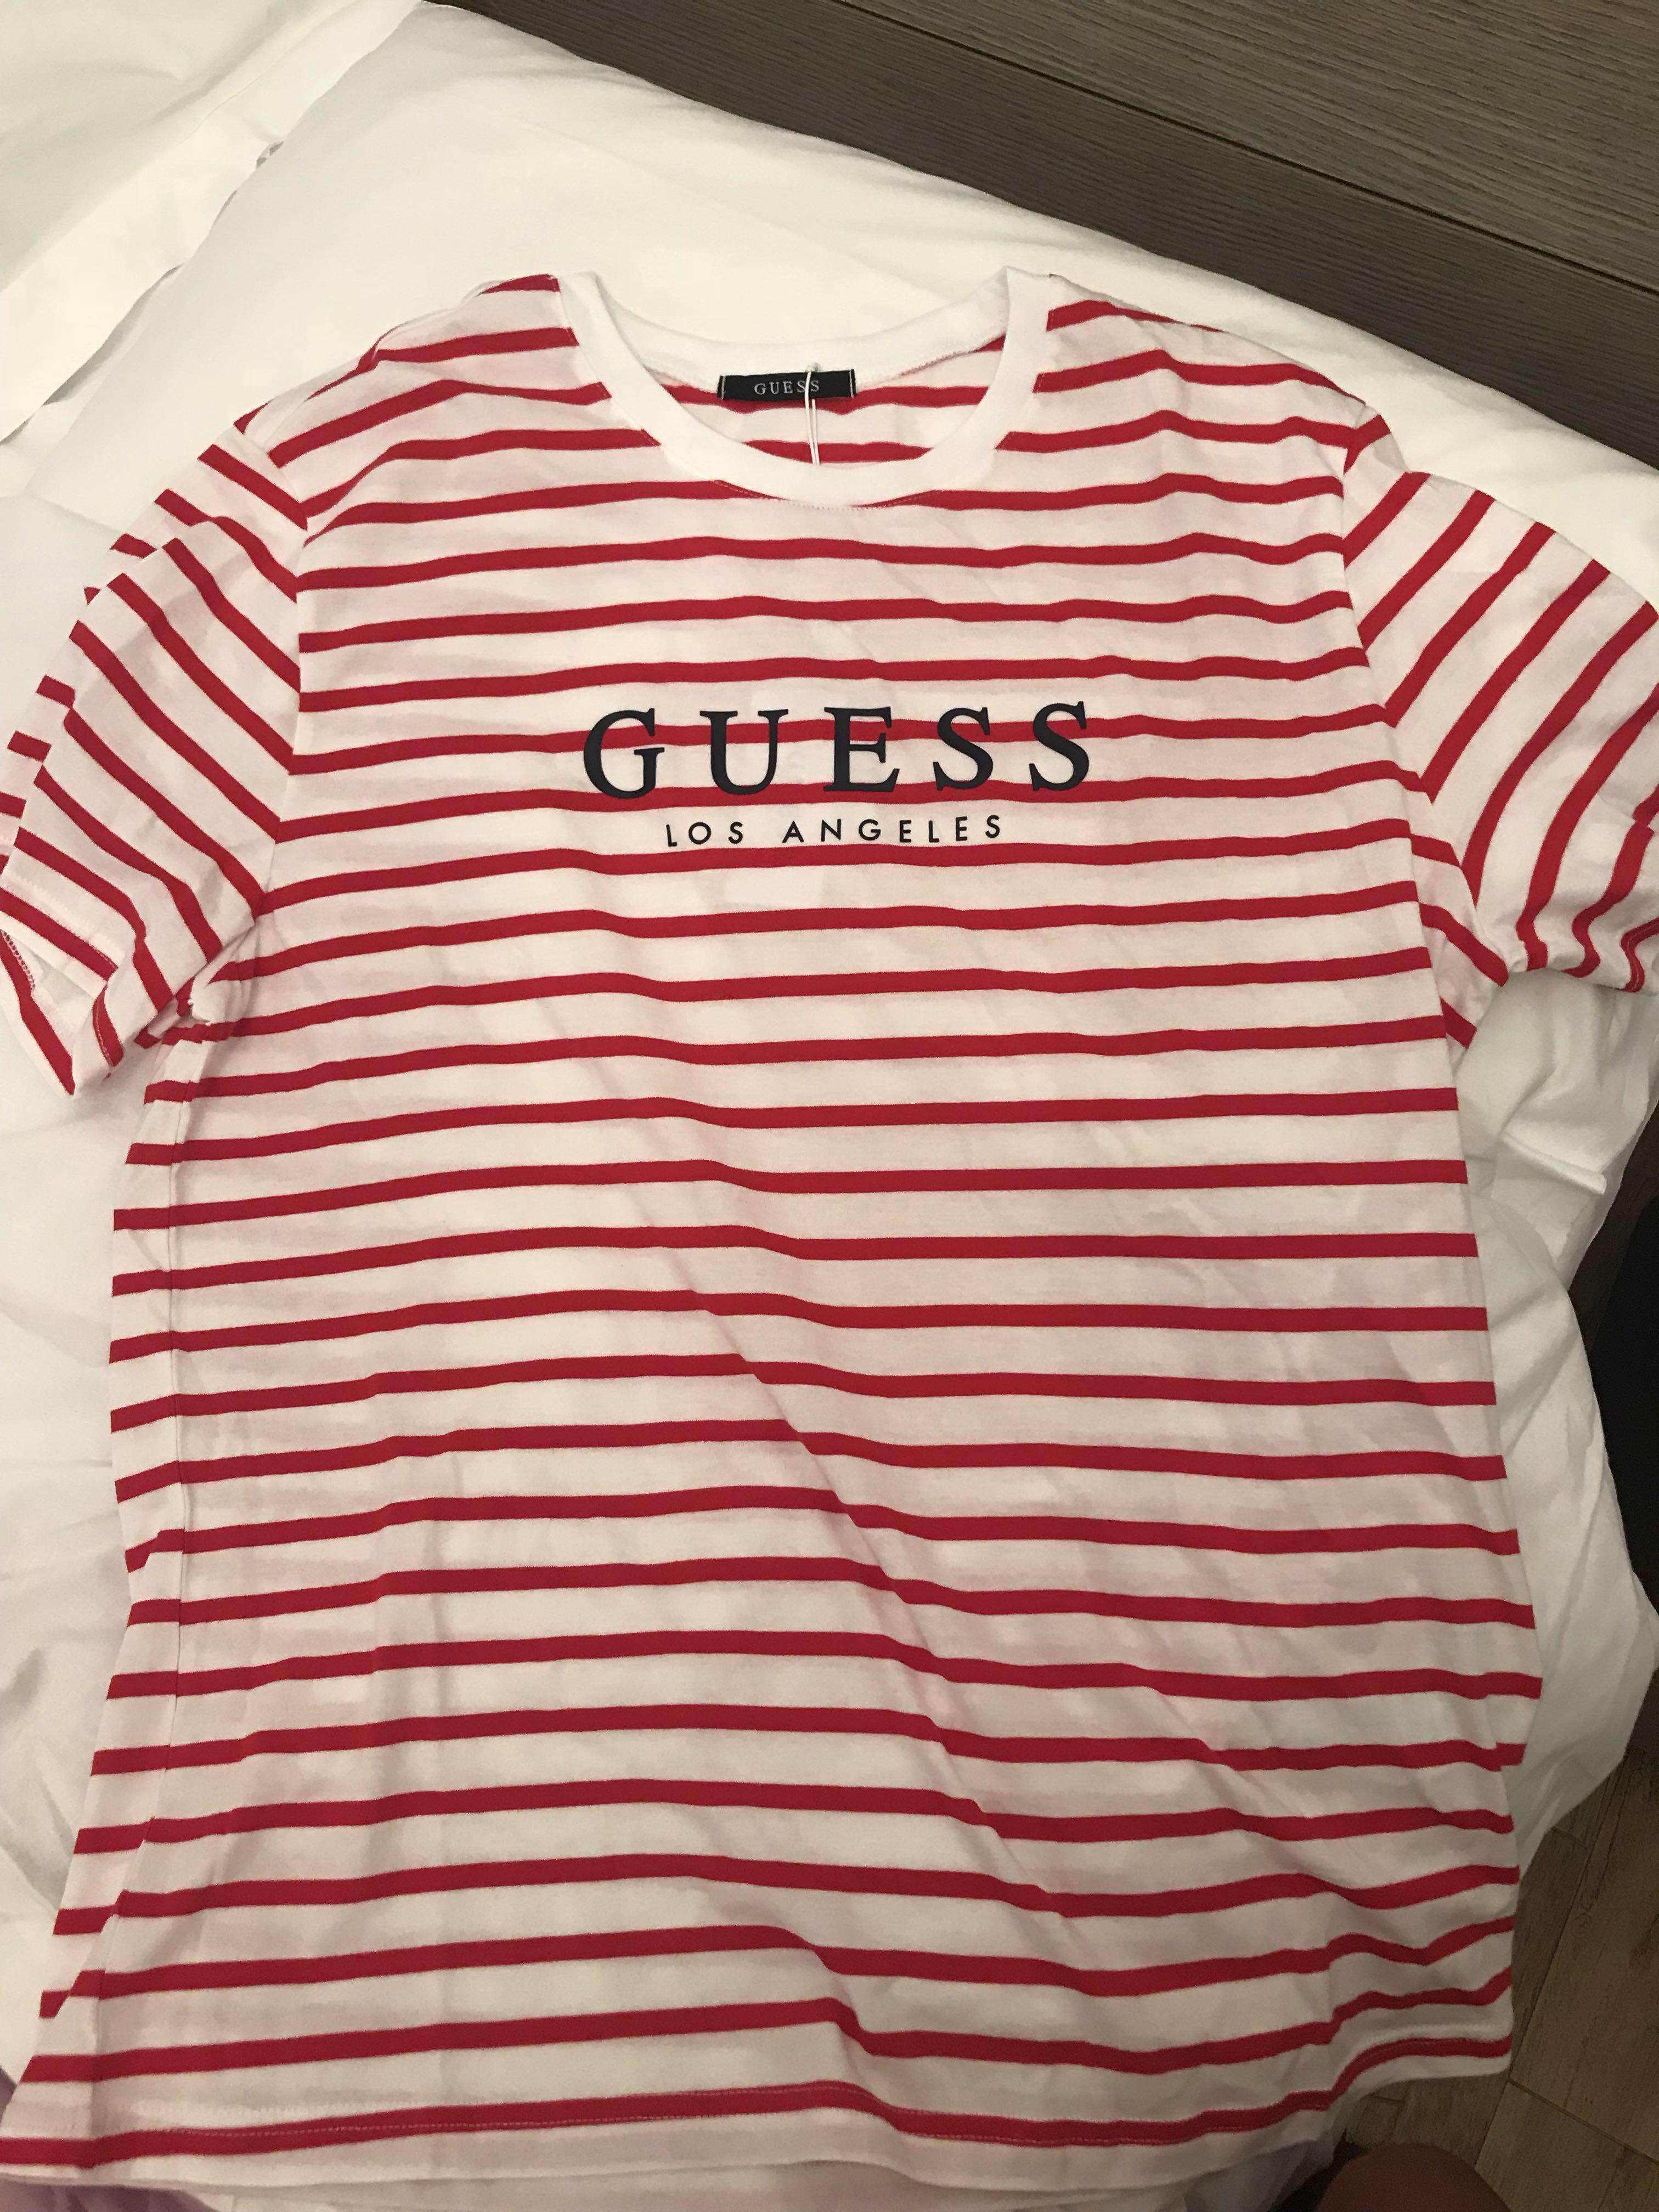 guess red white striped shirt